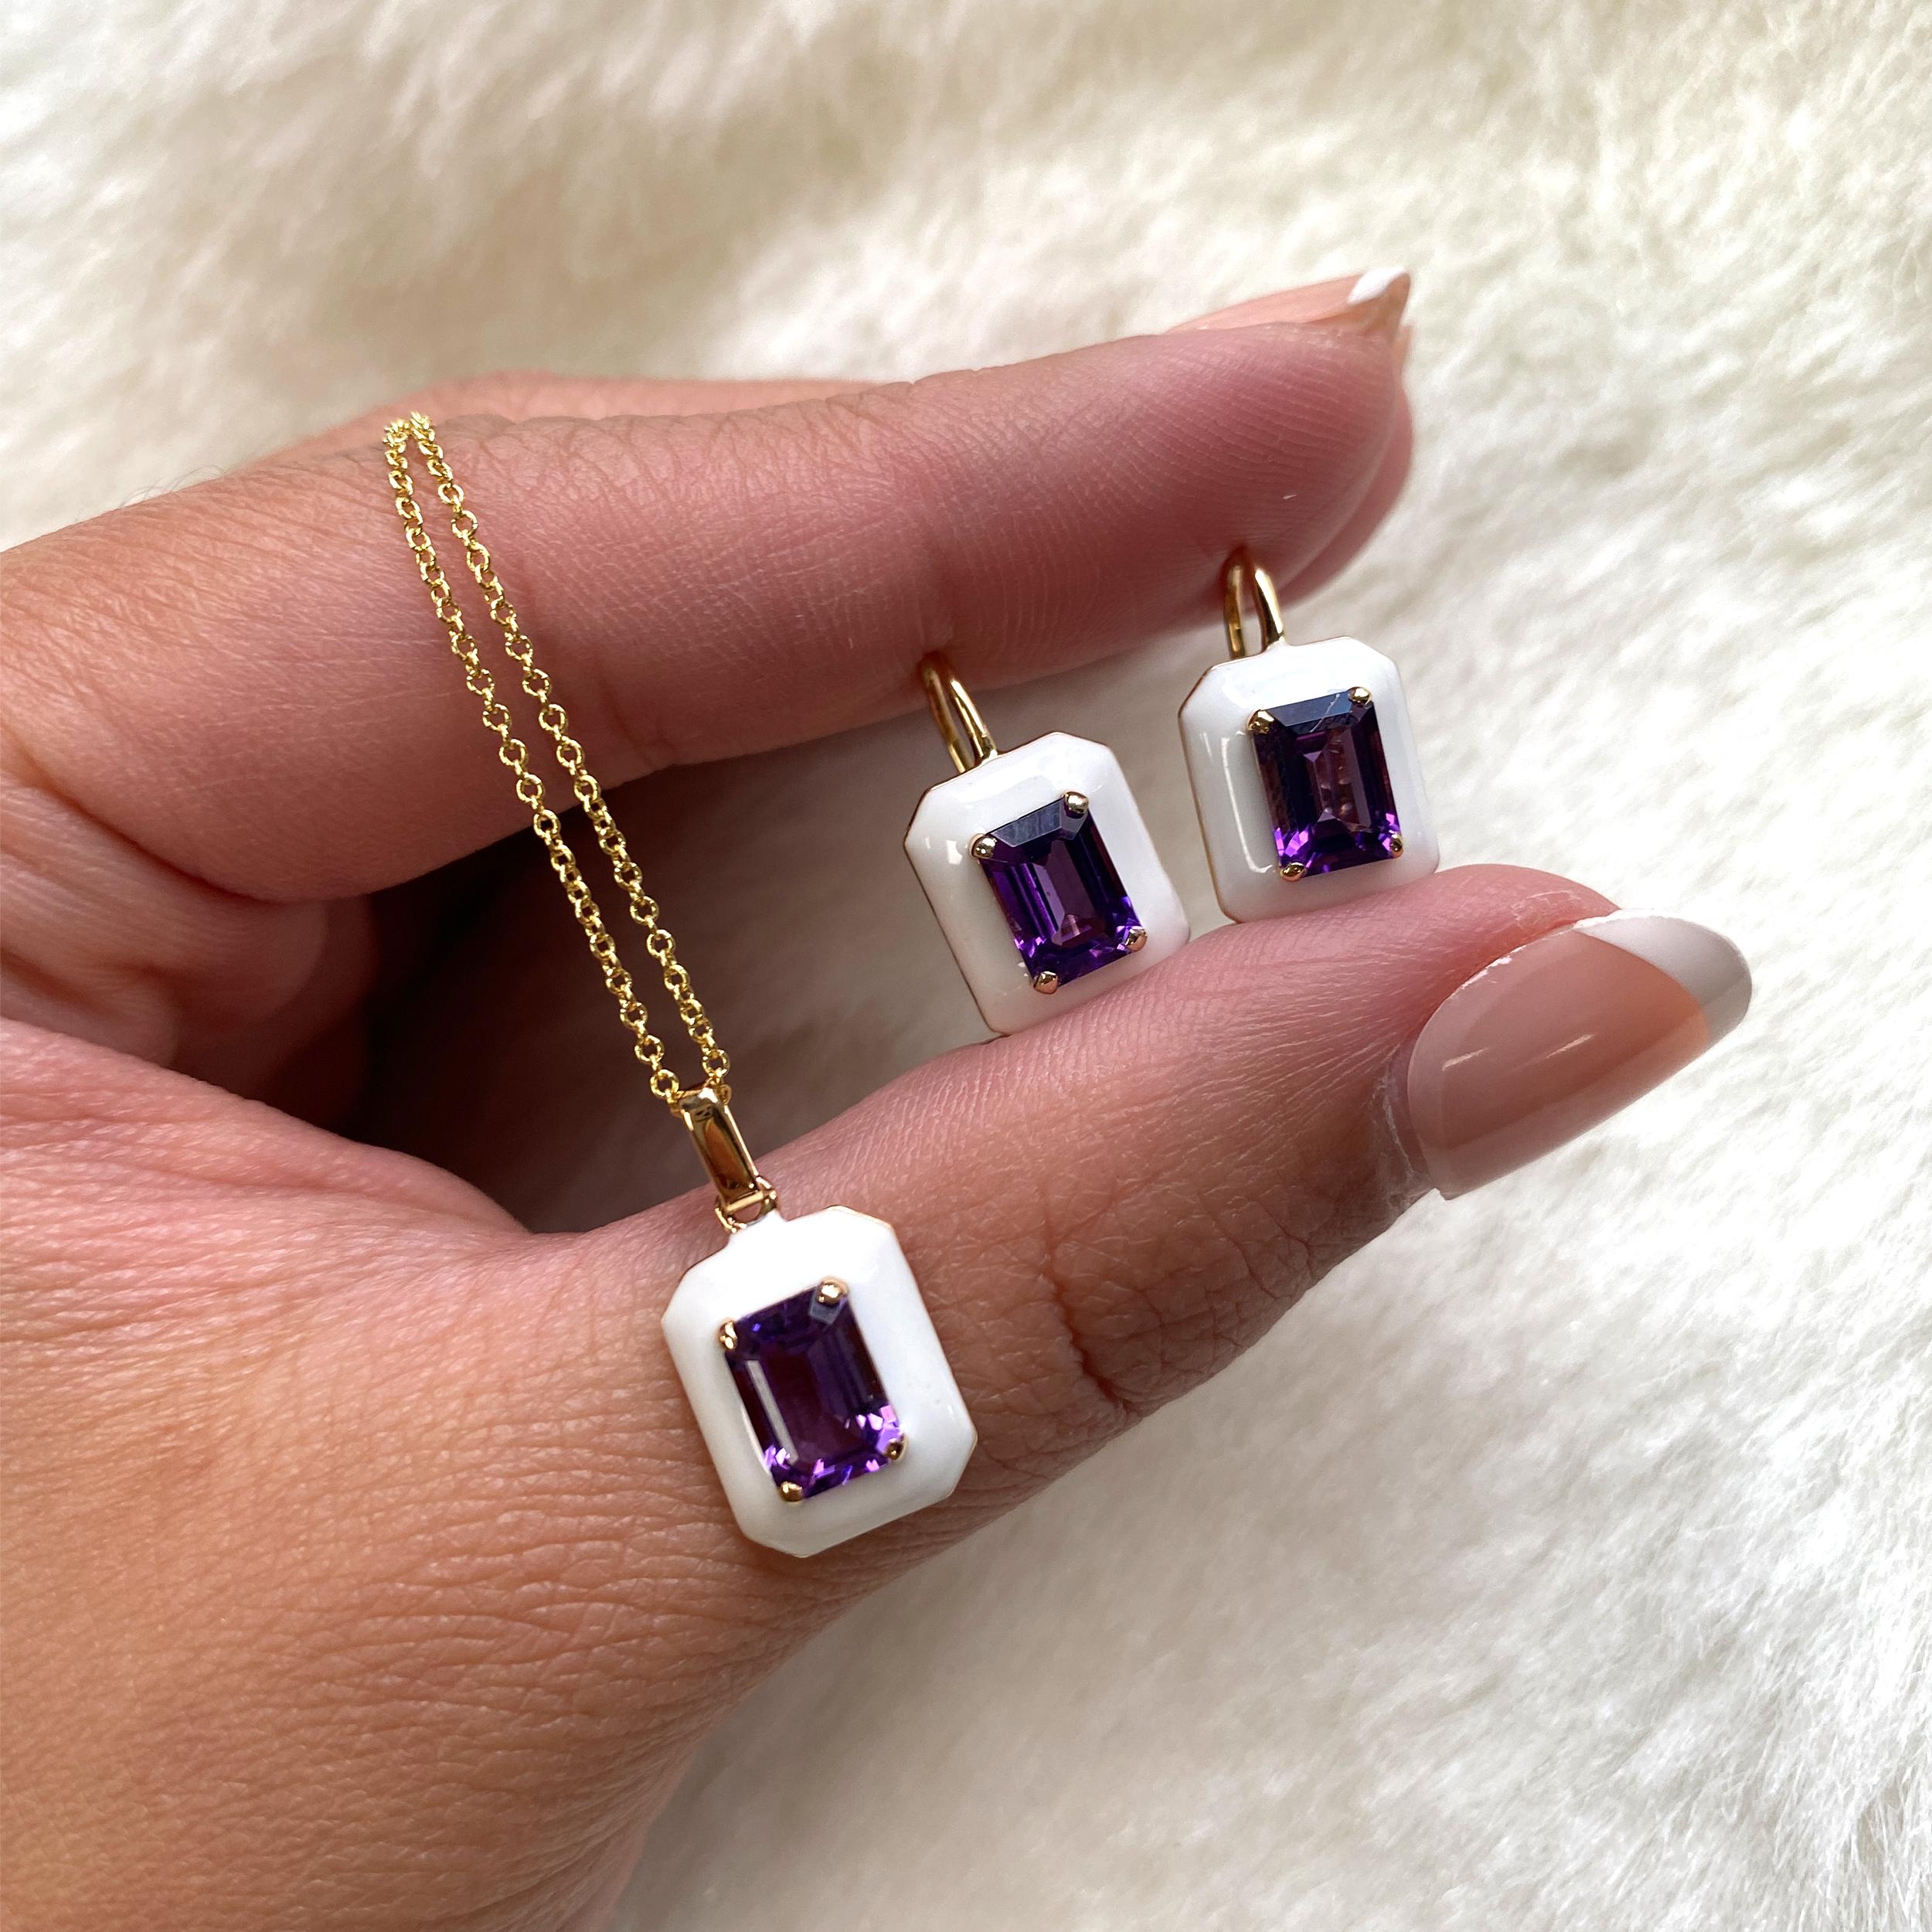 These unique earrings are an Amethyst Emerald Cut, with White Enamel border and Lever back. From our ‘Queen’ Collection, it was inspired by royalty, but with a modern twist. The combination of enamel, and Amethyst represents power, richness and